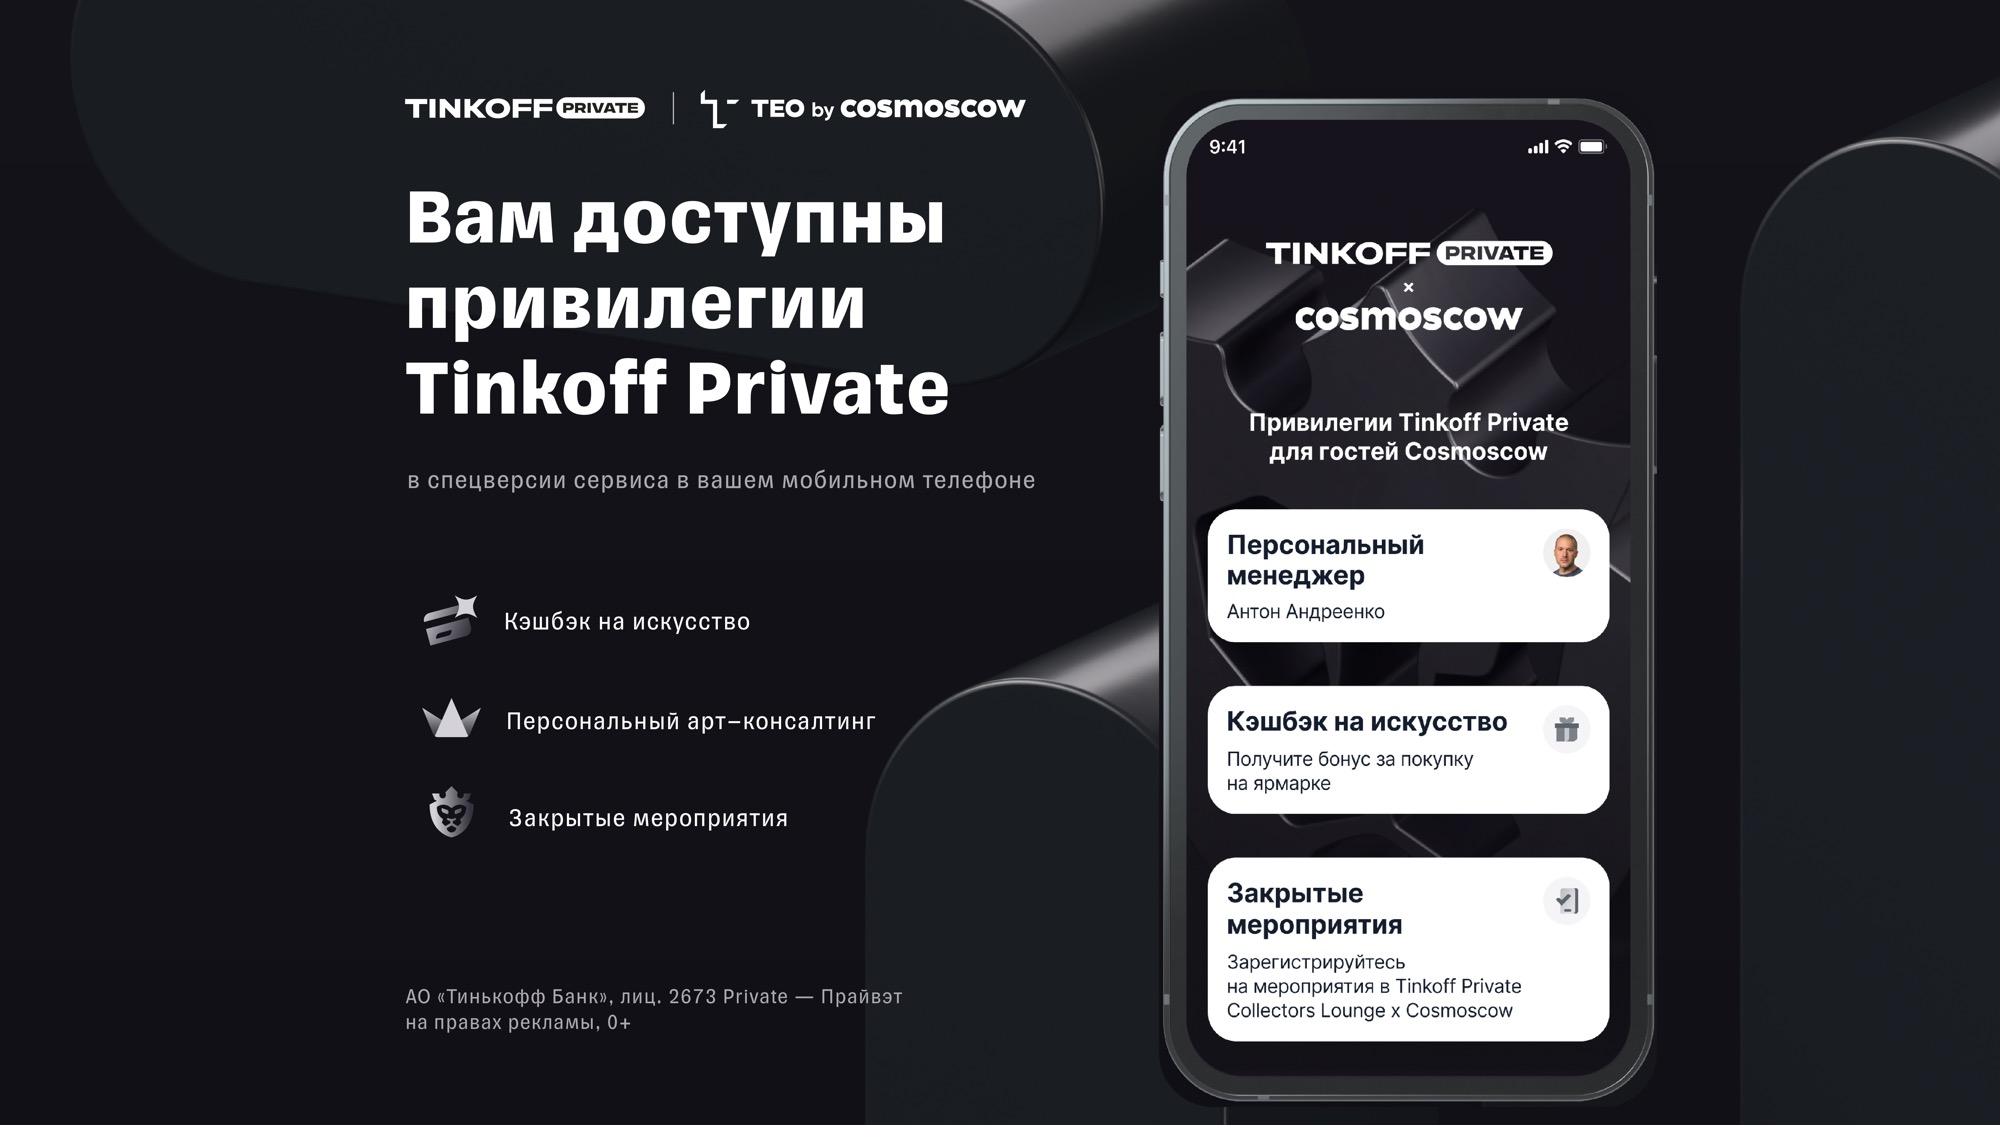 Tinkoff Private